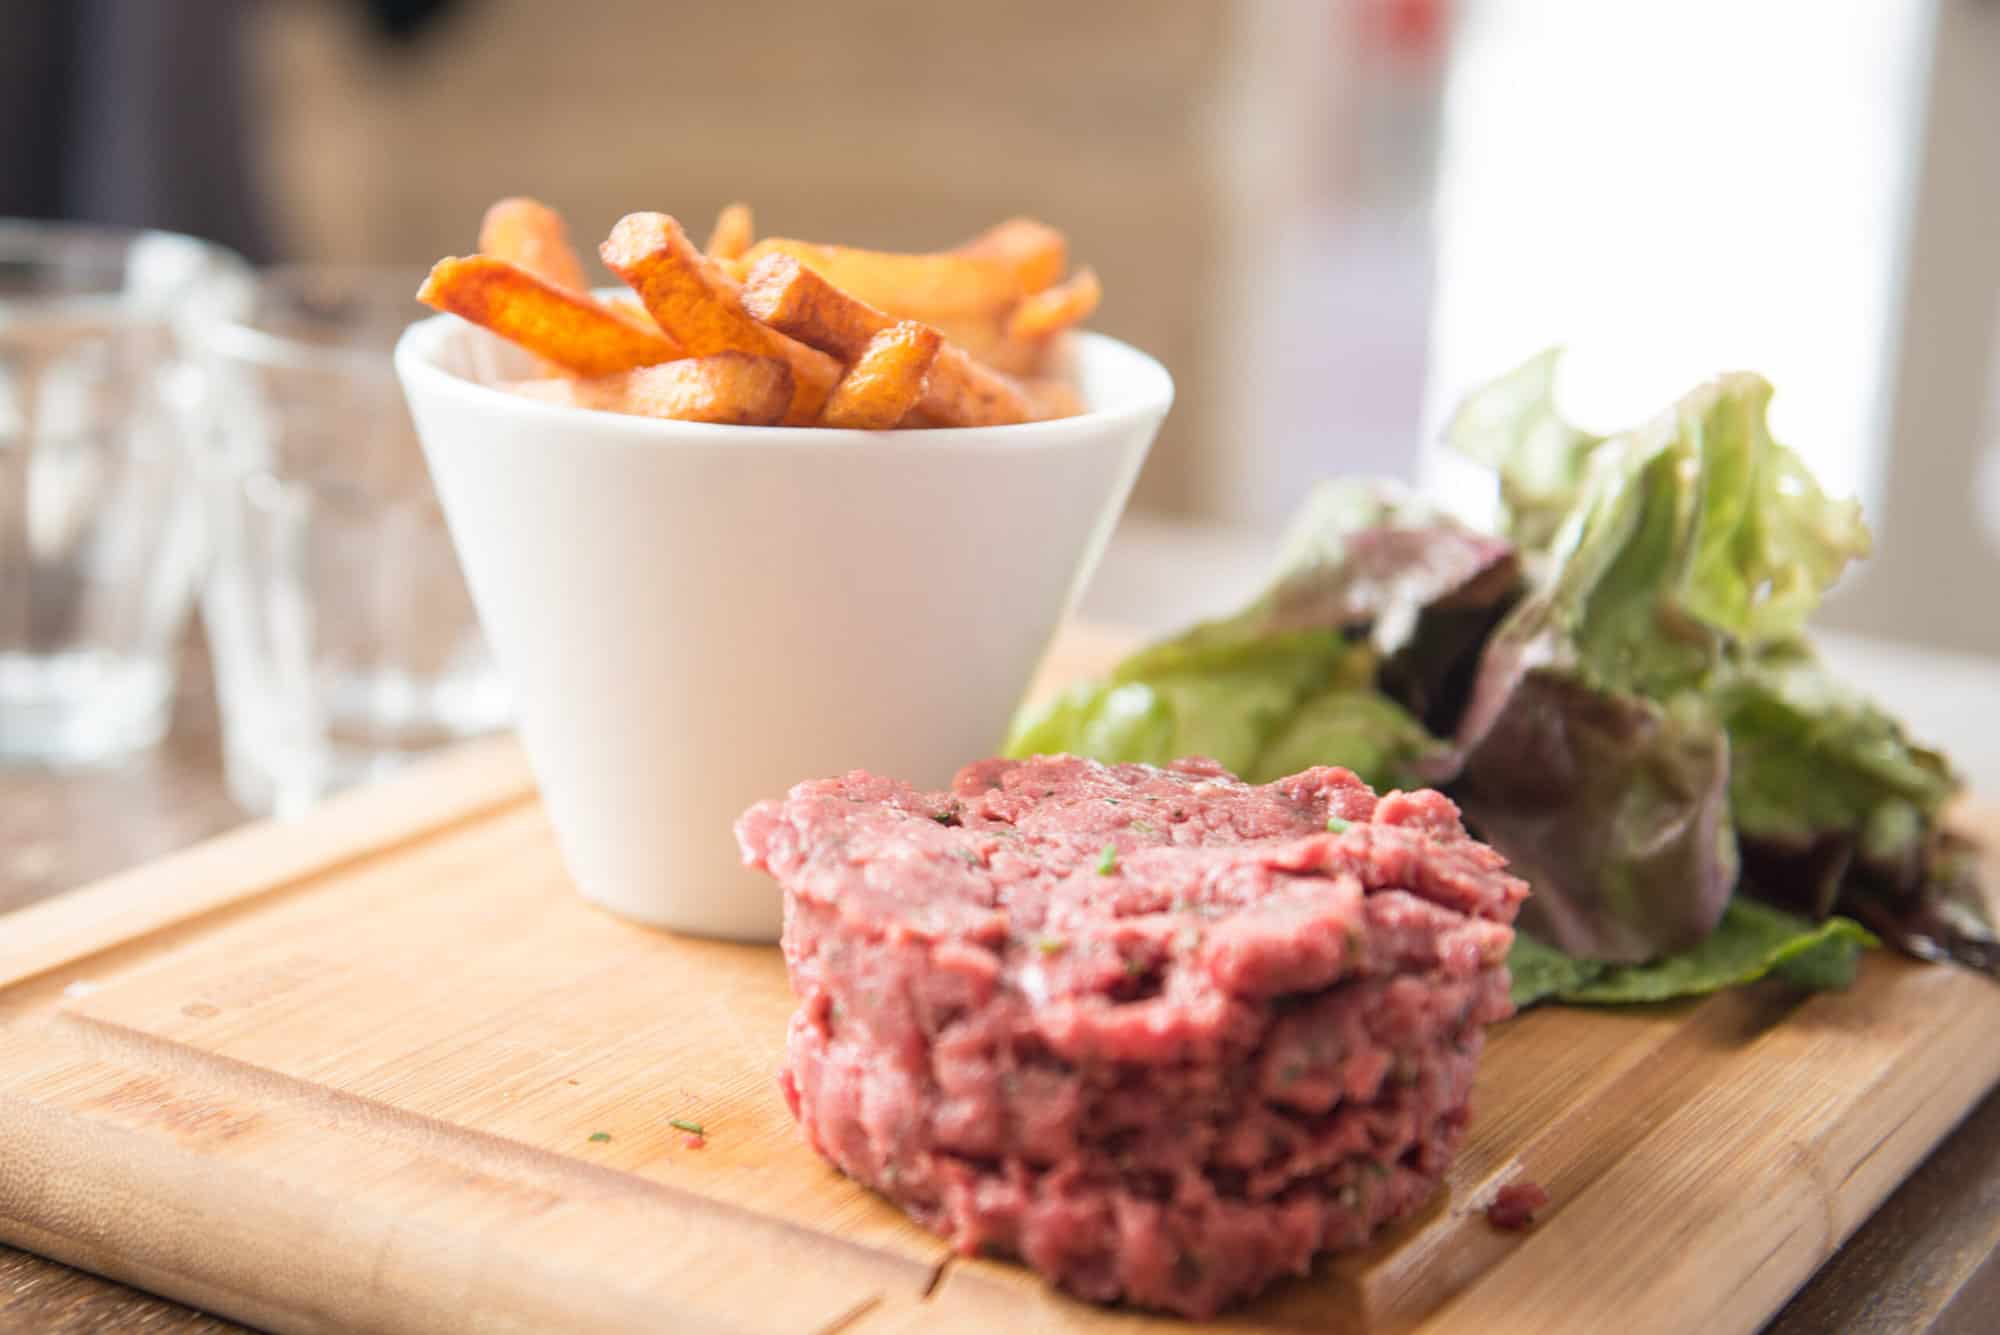 A close up of one of their menu, the Steak Tartare, served in a wooden board with salad and fries on the side. The fries is served in a white small cylindrical bowl.